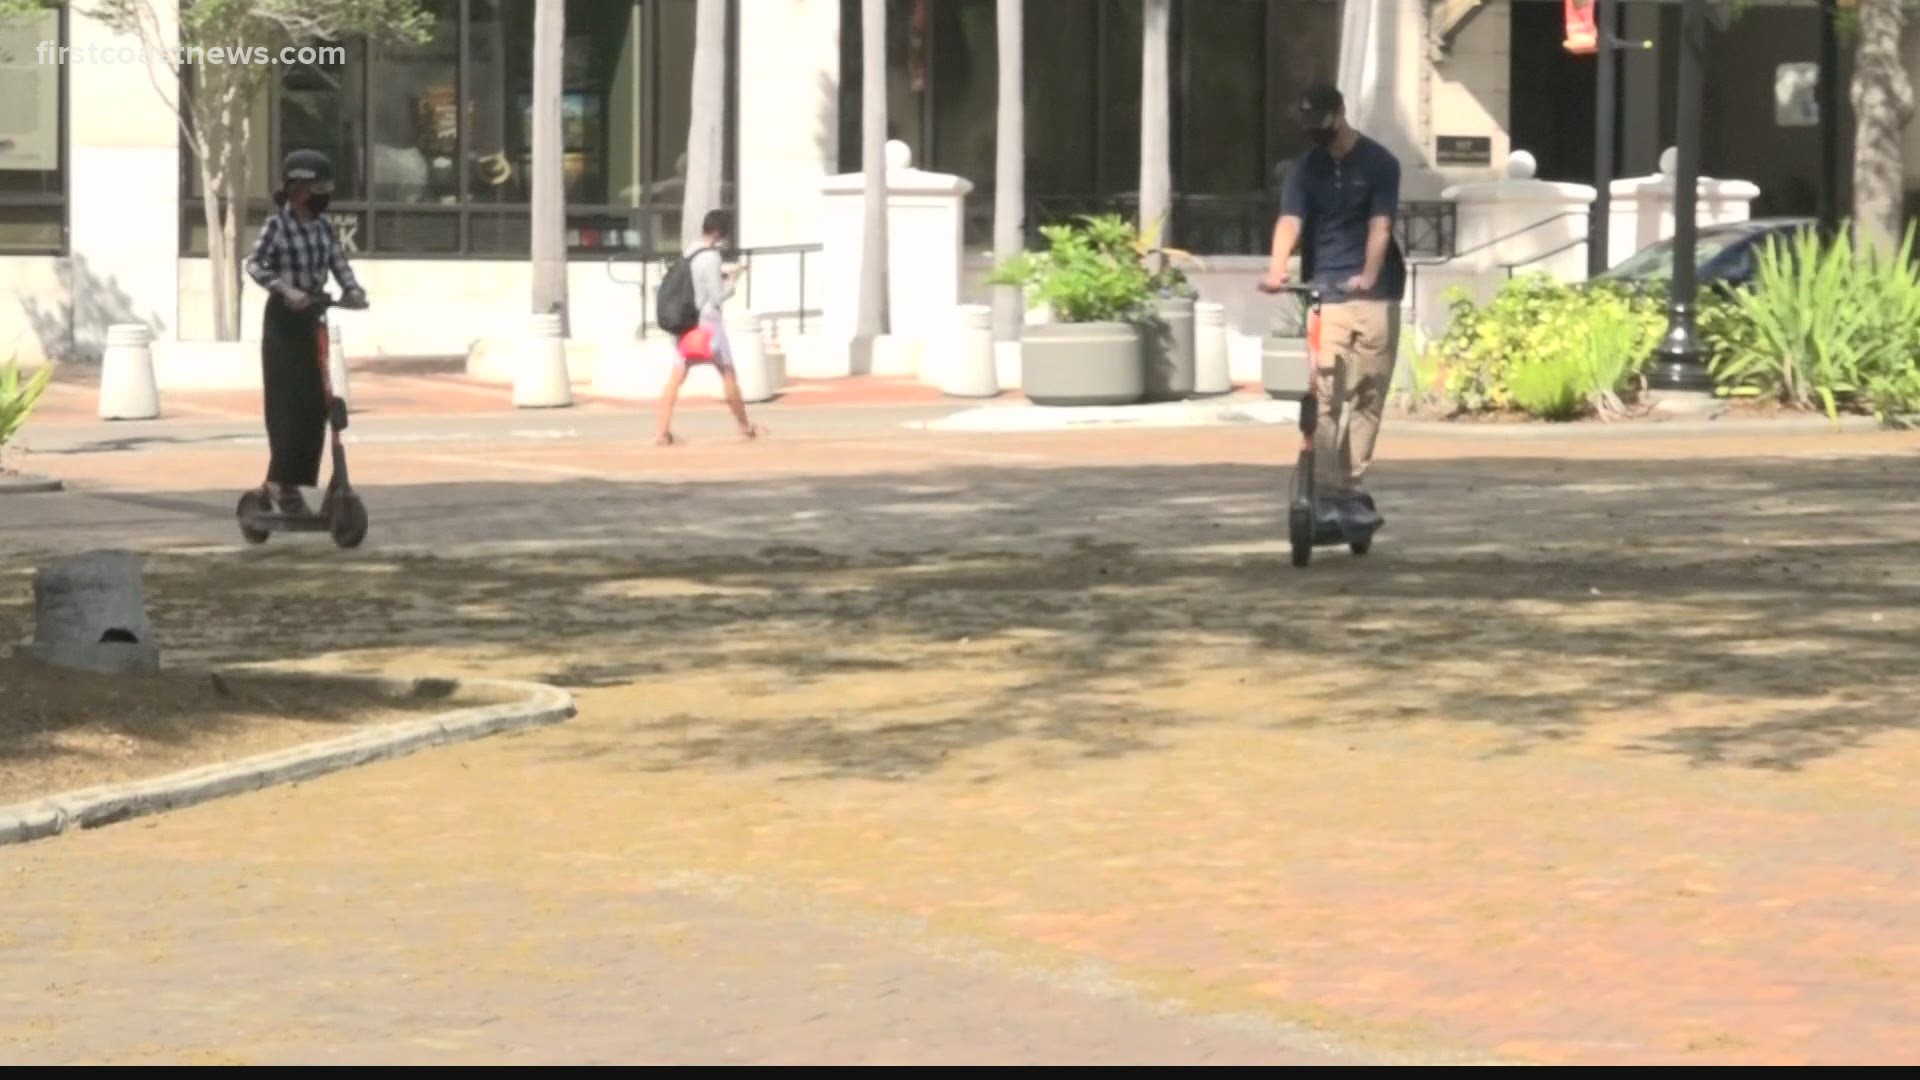 Spin held an event Friday for riders to educate them on how to operate a scooter.